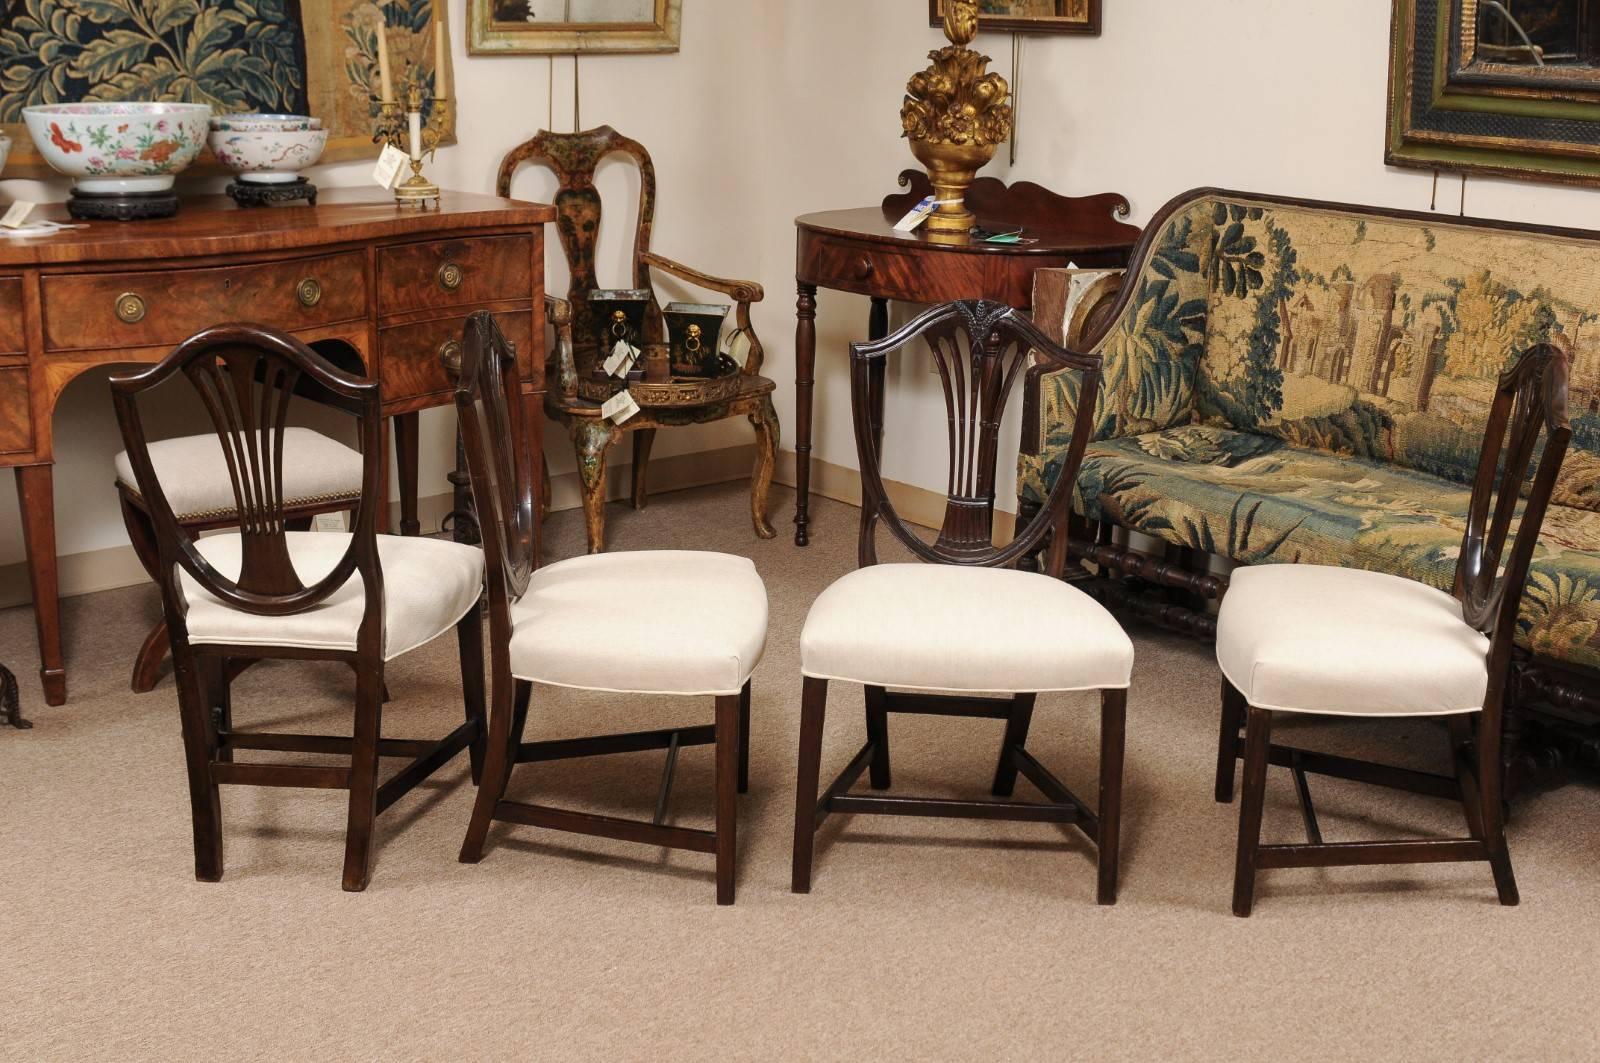 Set of 4 George III Mahogany Shieldback dining chairs, England, upholstered in linen.